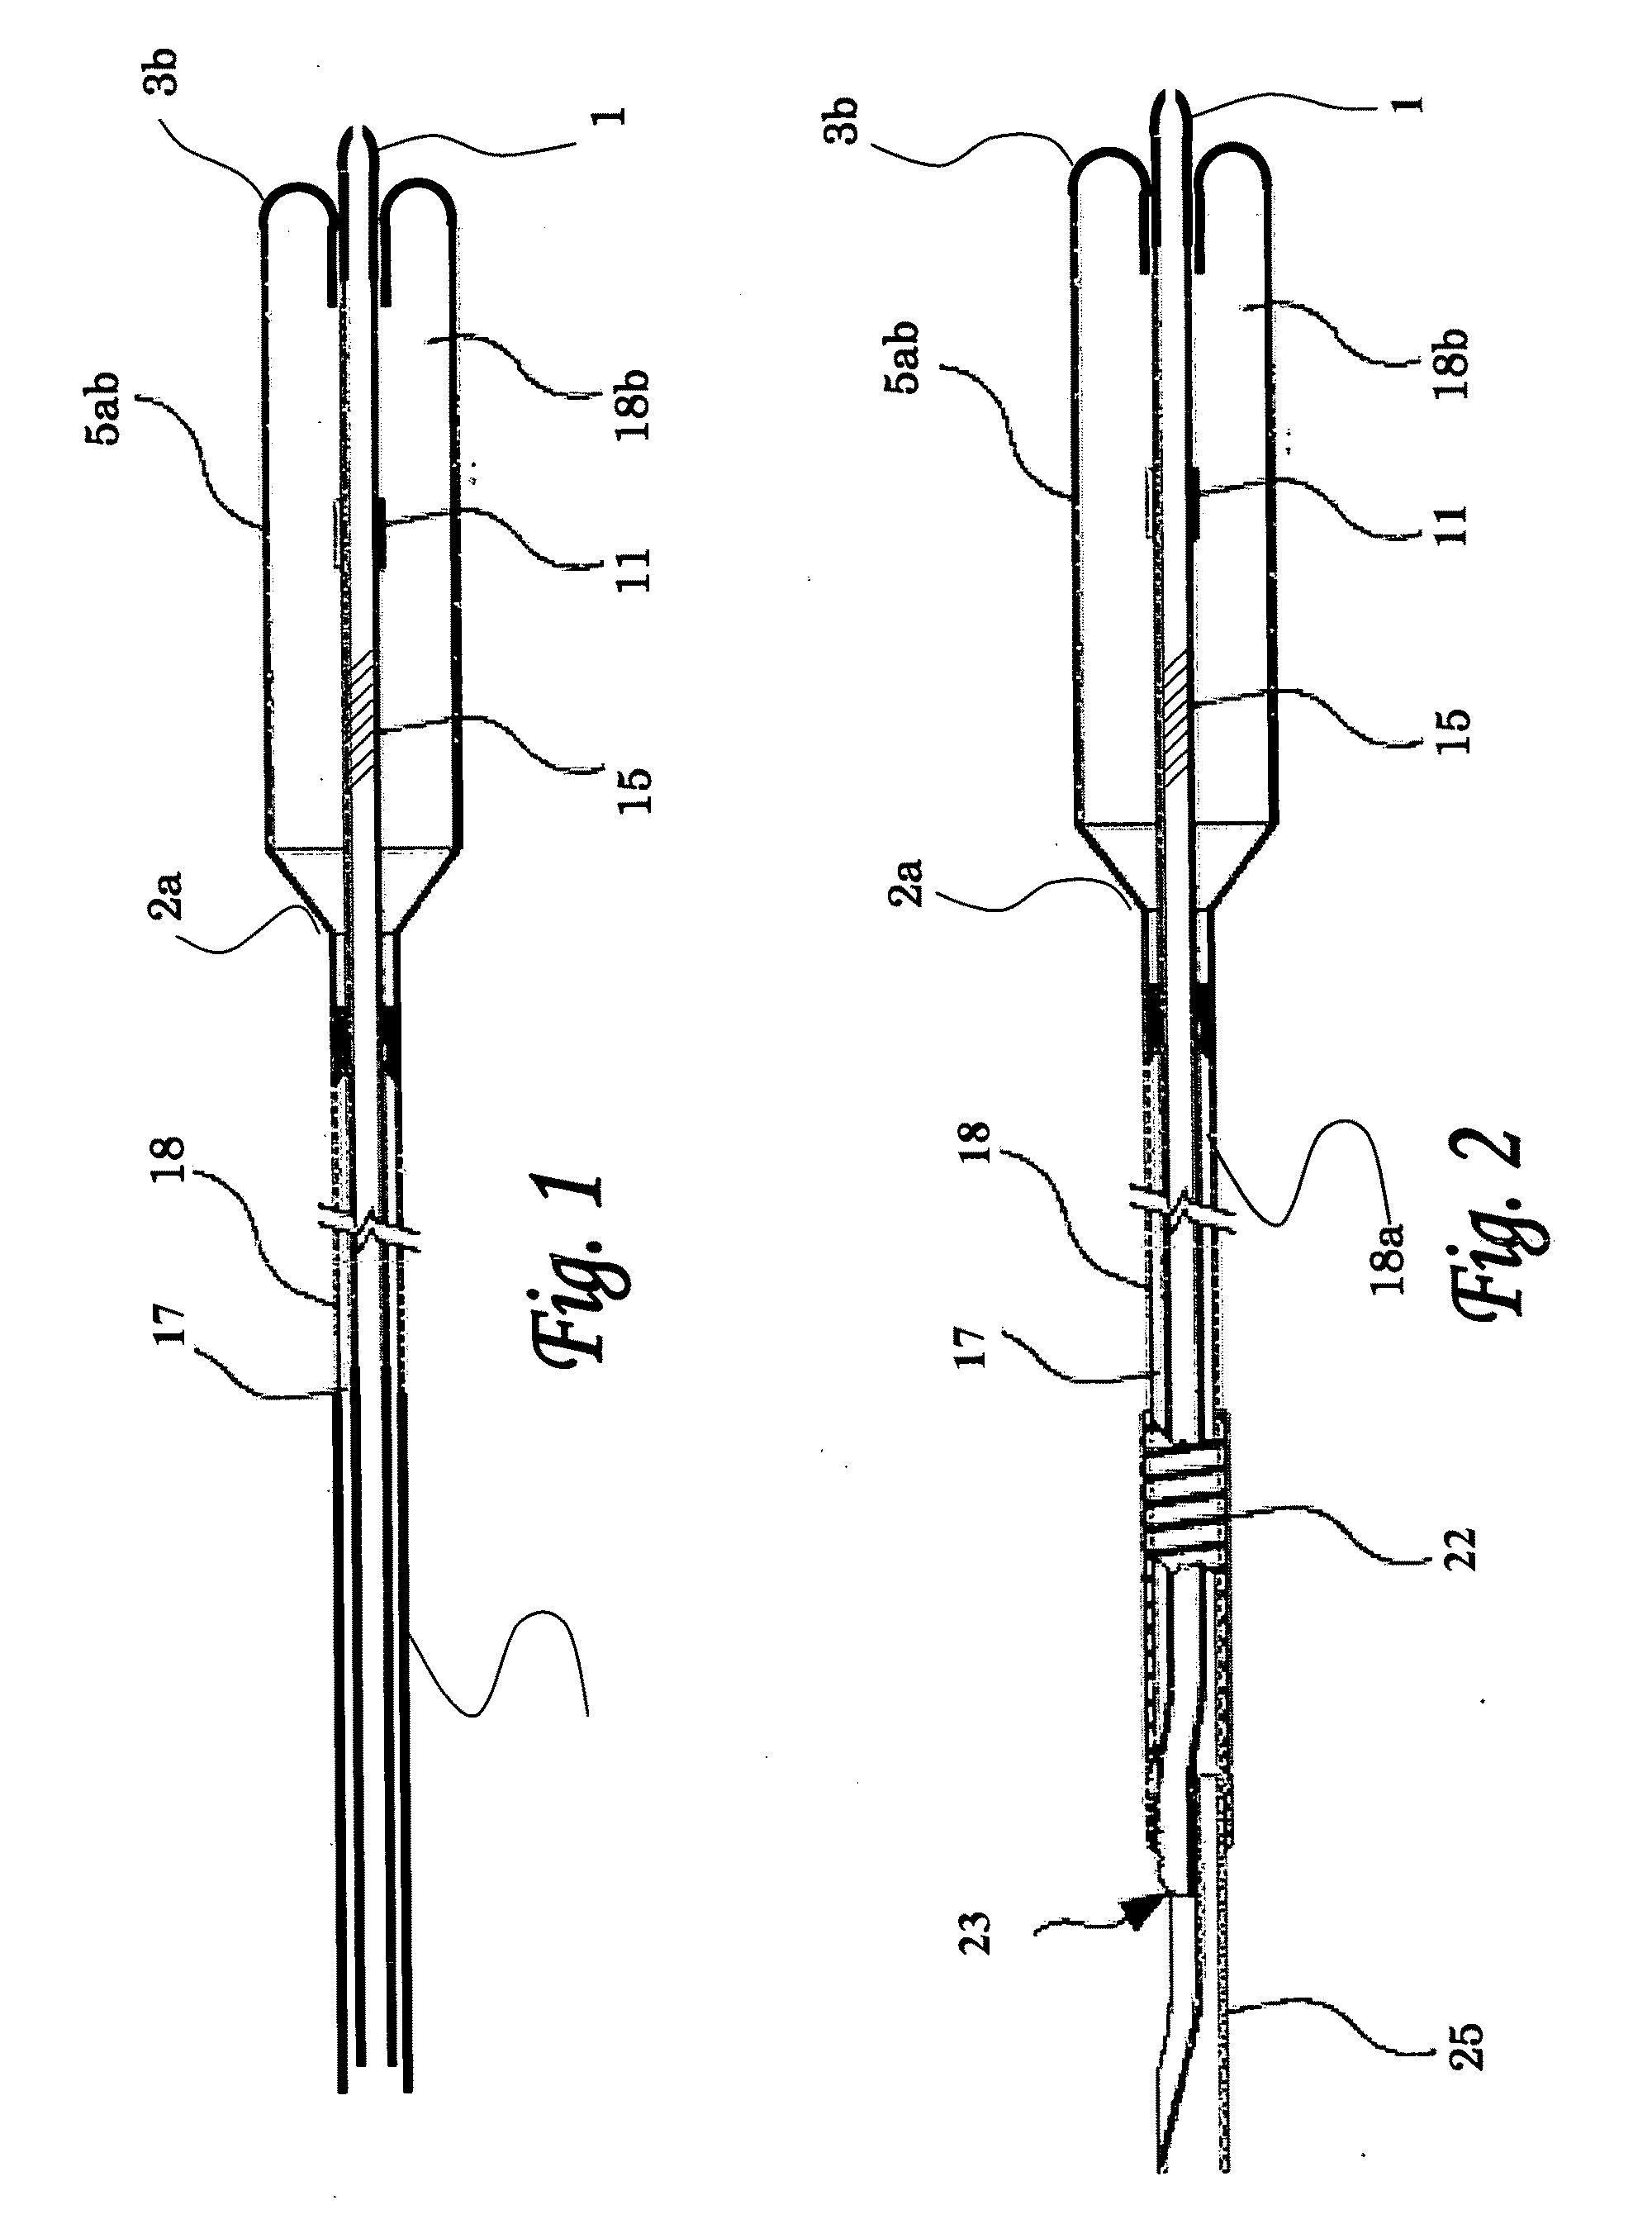 Balloon catheter system for treating vascular occlusions